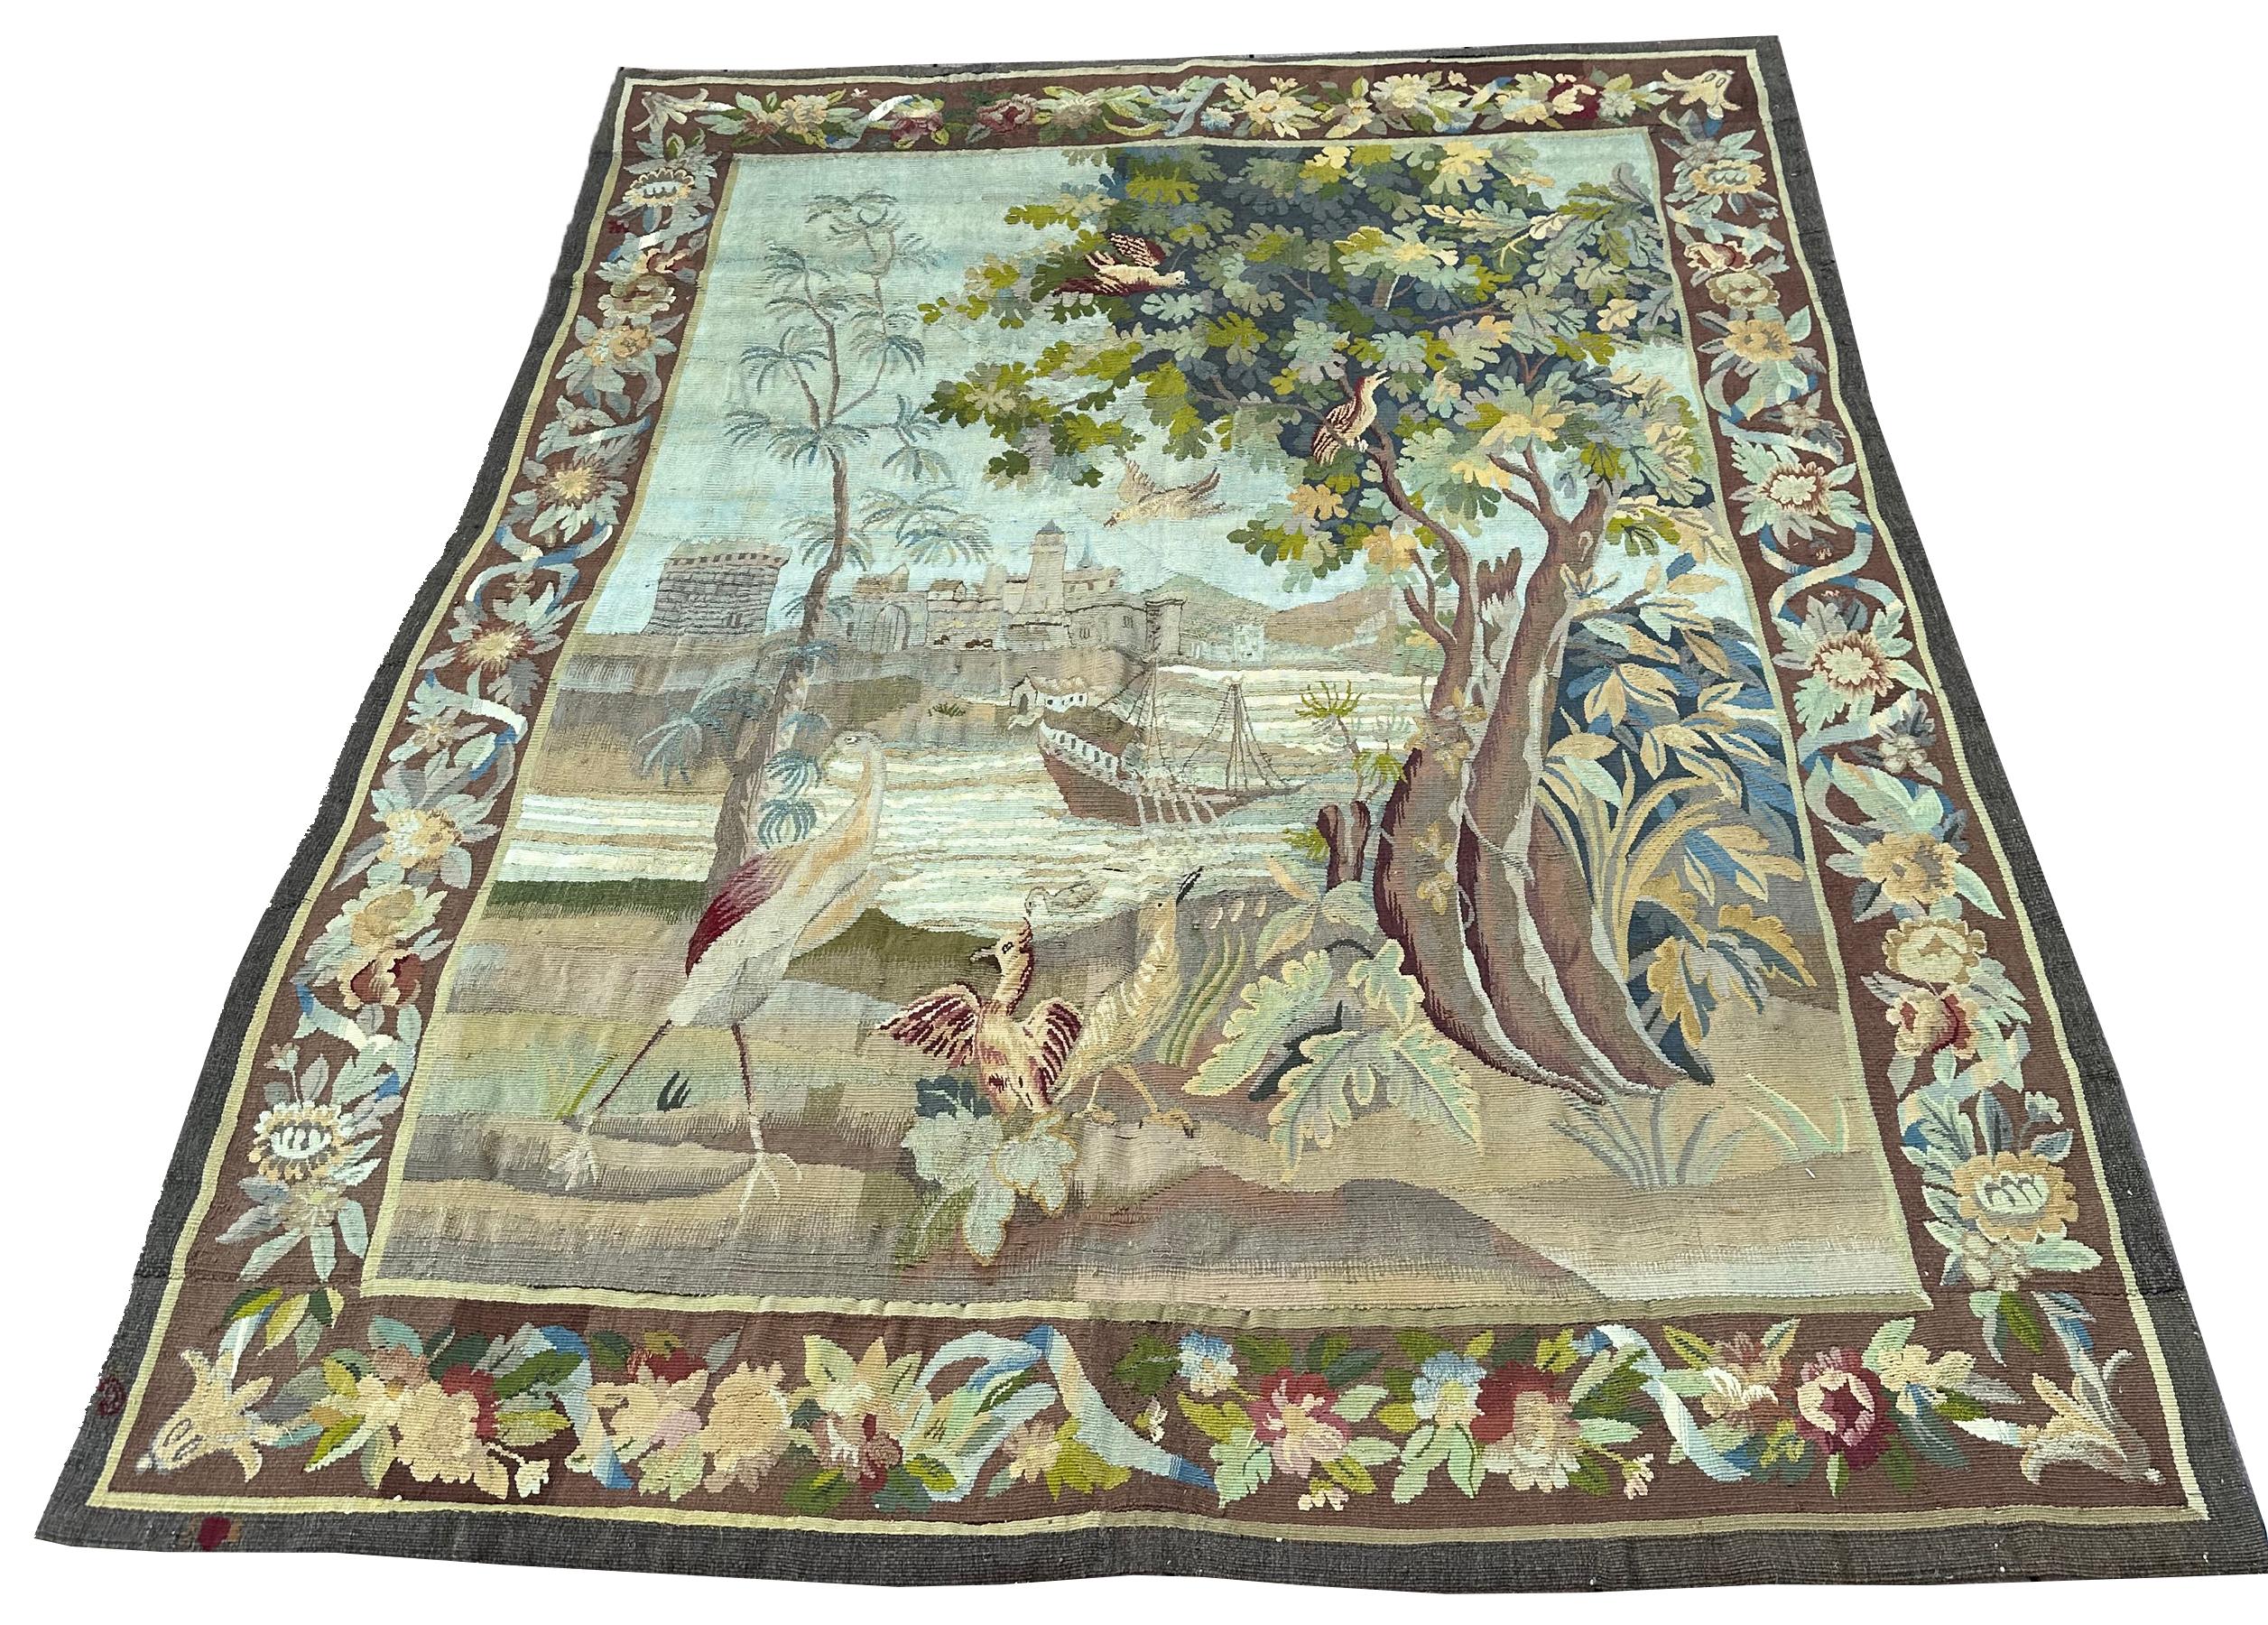 Hand-Woven Antique French Tapestry Verdure Signed 1880 Wool & Silk 5x7 153cm x 201cm For Sale